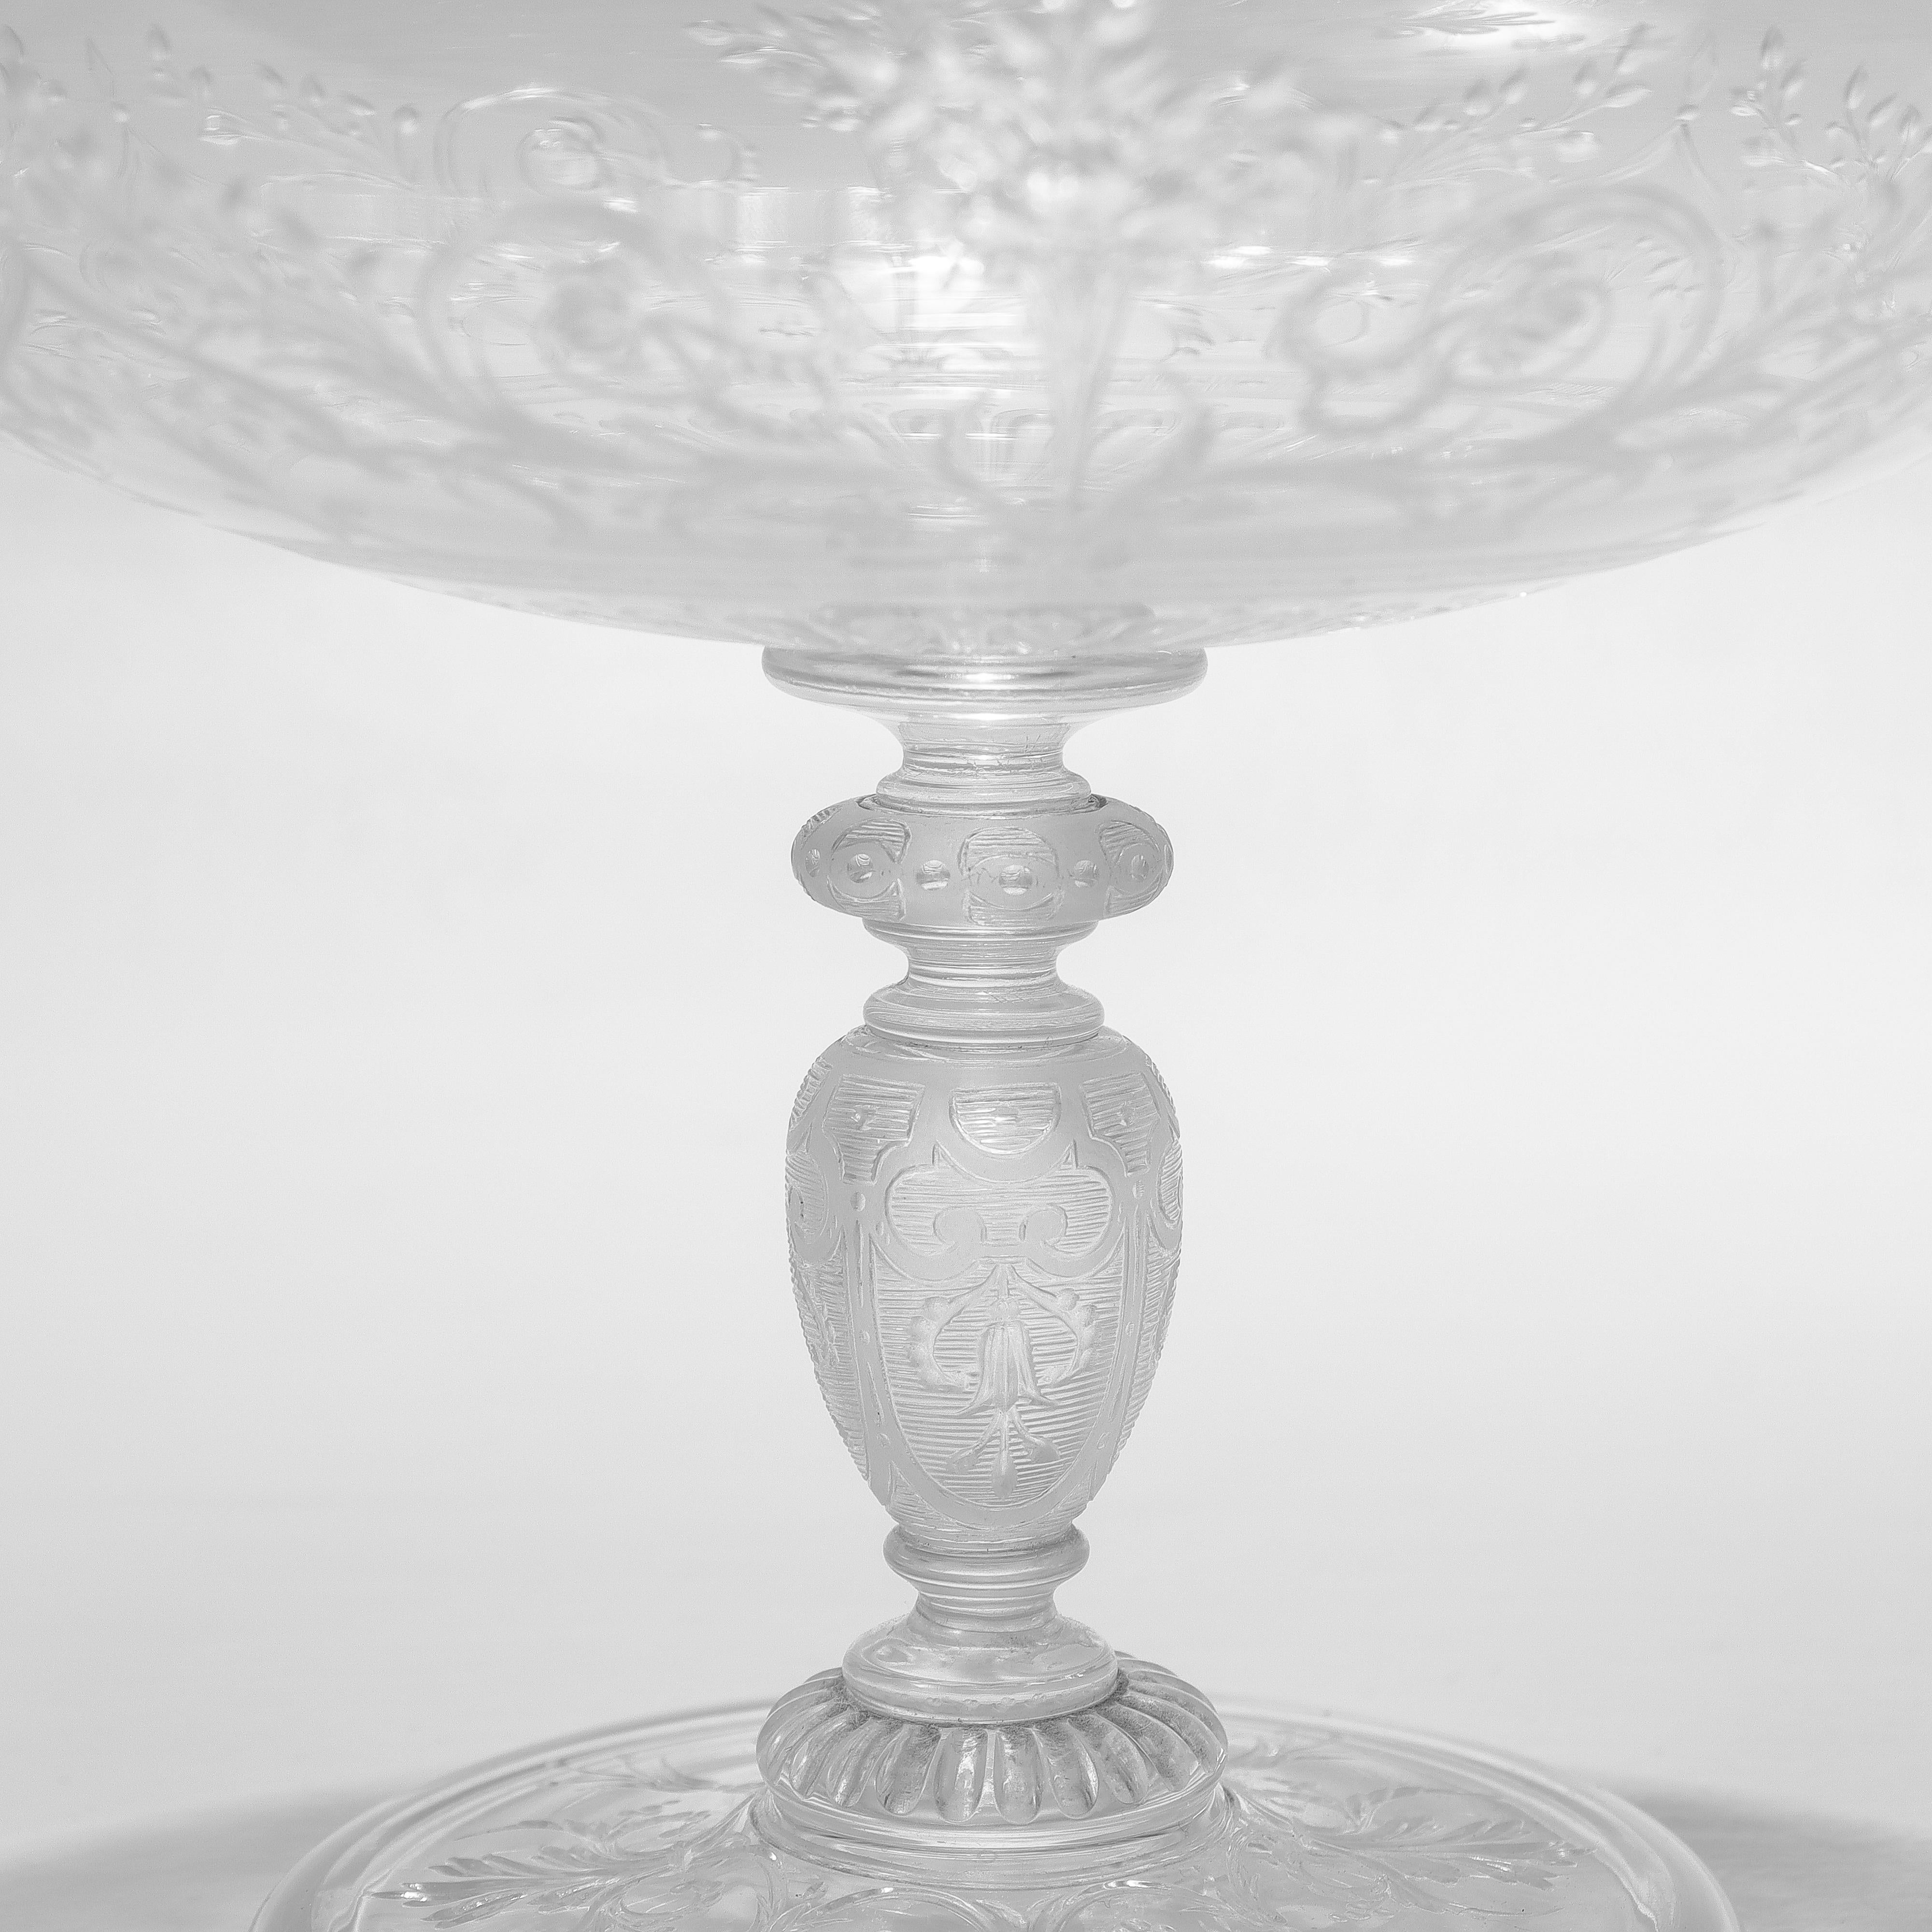 Antique Stourbridge Etched & Engraved Glass Lidded Compote or Tazza For Sale 8